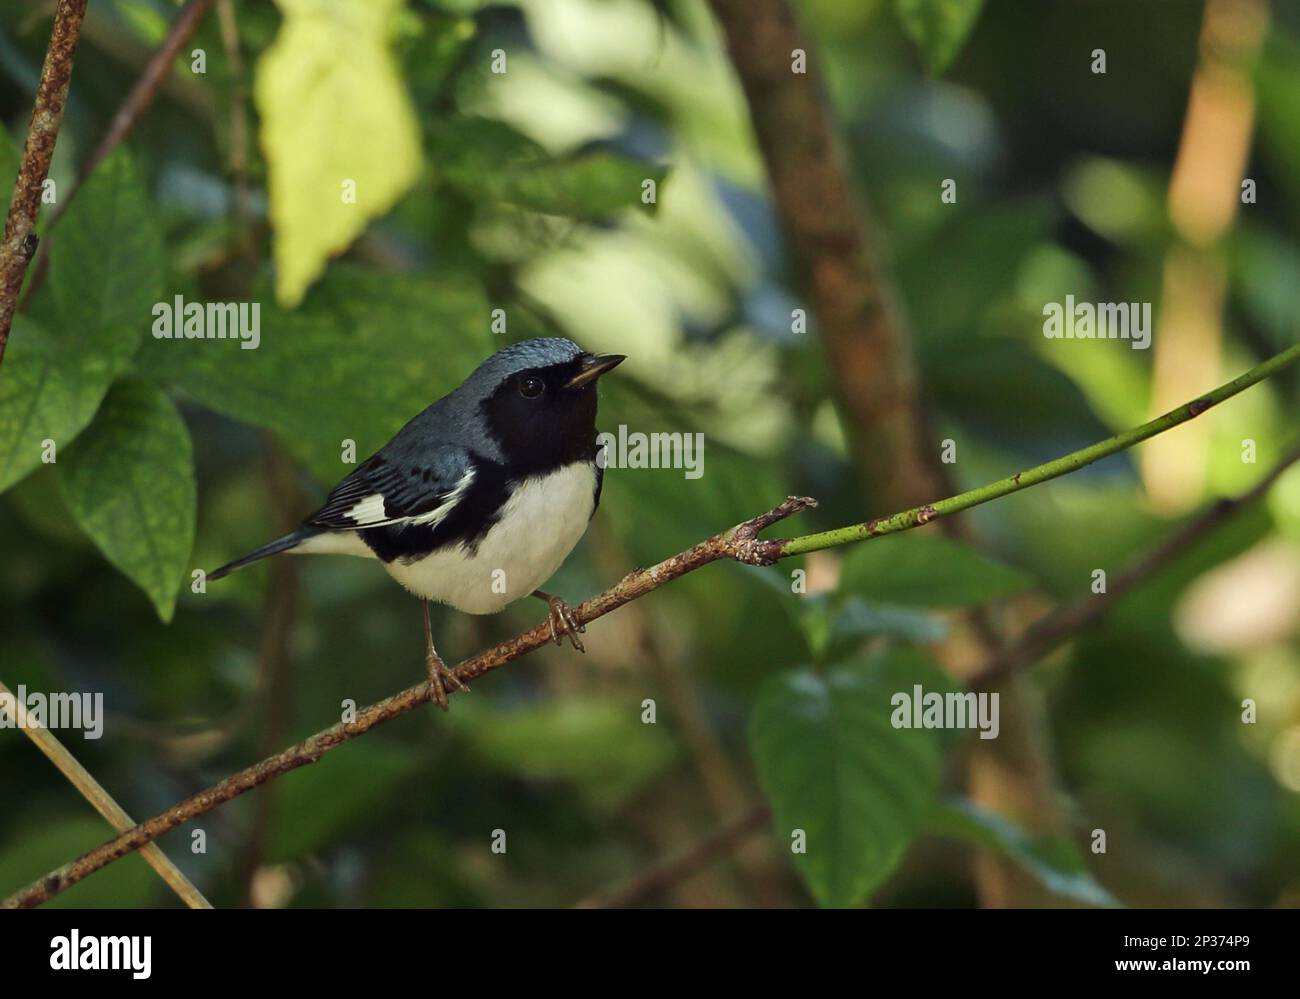 Black-throated Blue Warbler (Dendroica caerulescens) adult male, perched on twig, Linstead, Jamaica Stock Photo